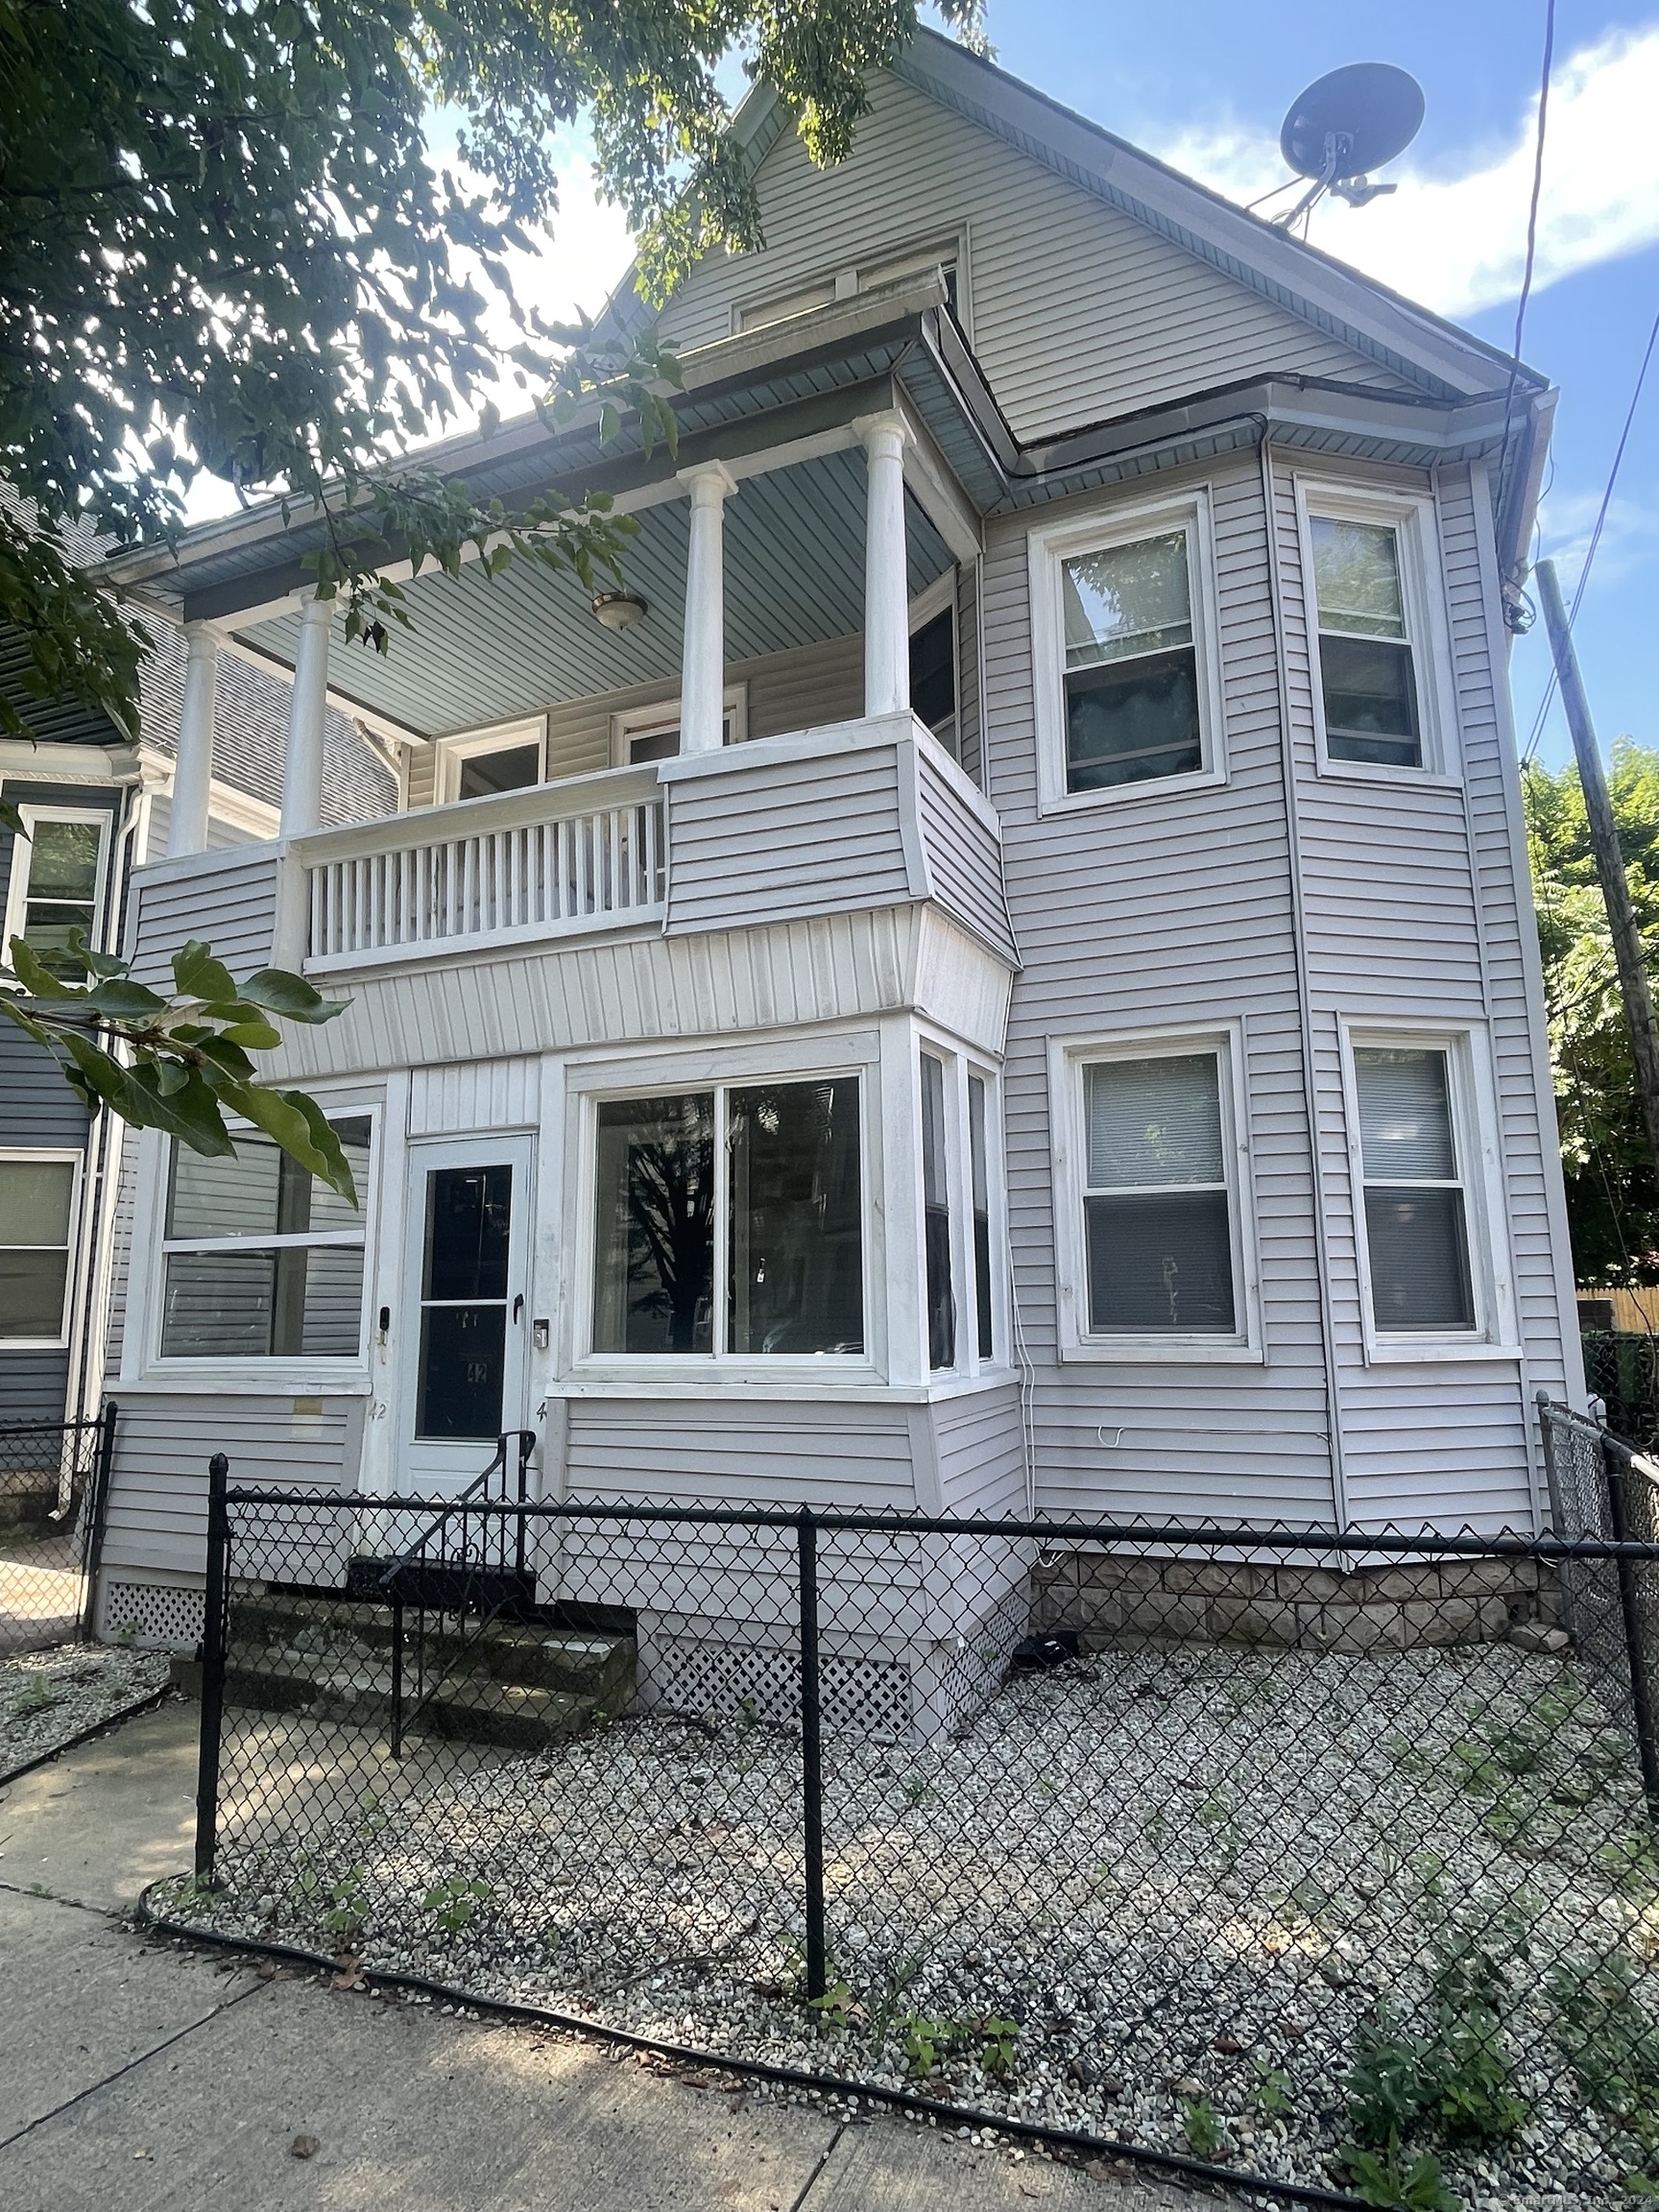 Rental Property at 42 Bassett Street, New Haven, Connecticut - Bedrooms: 3 
Bathrooms: 1 
Rooms: 5  - $1,900 MO.